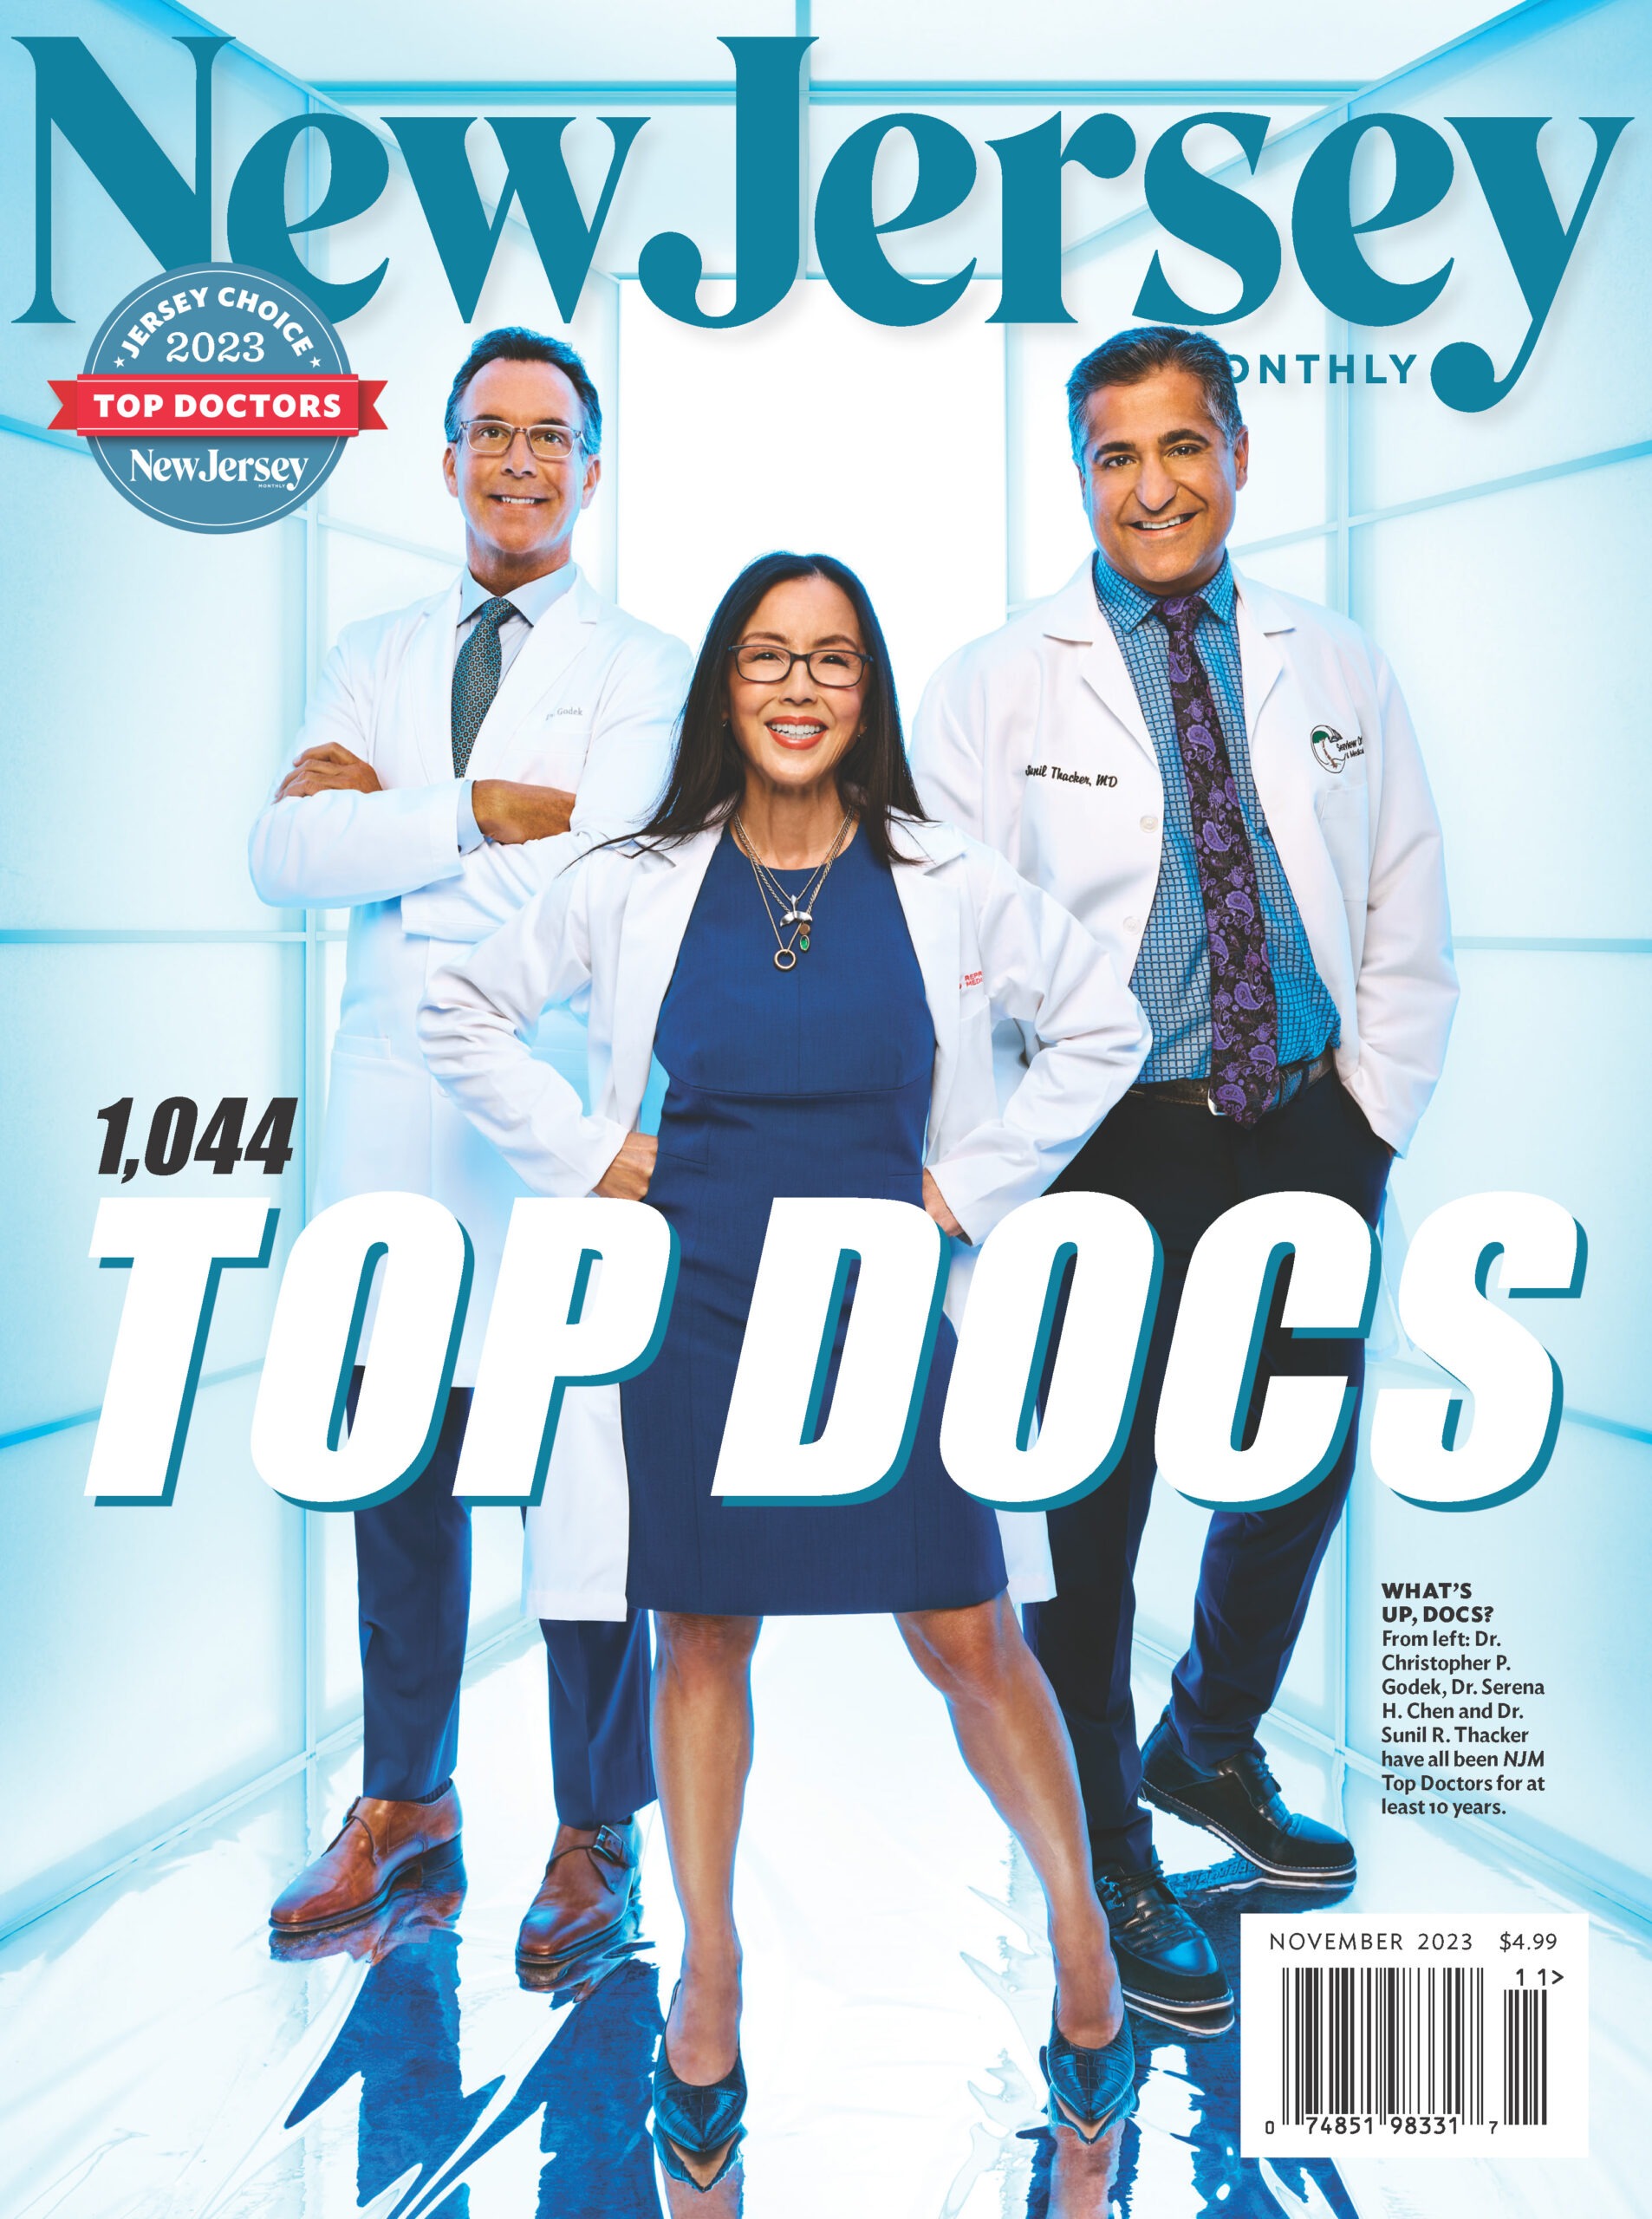 NJ Monthly Magazine Cover for Top Doctors in NJ.